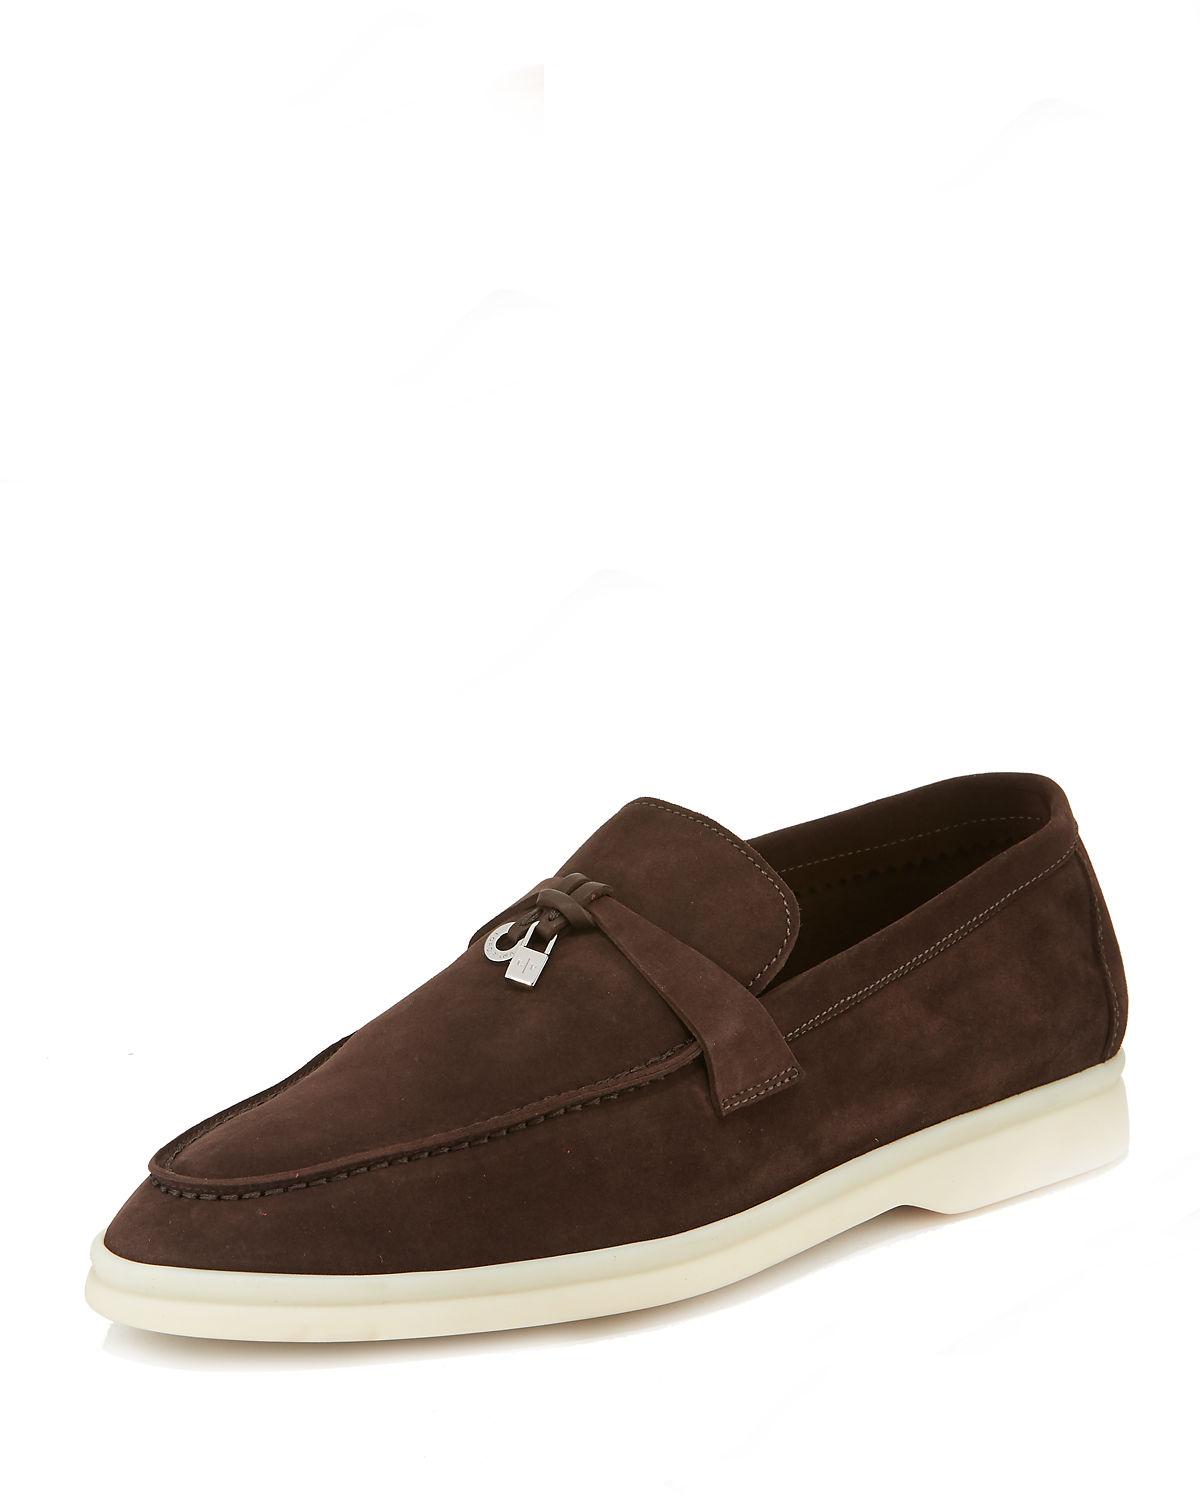 Lyst - Loro Piana Summer Charms Walk Suede Loafers in Brown for Men